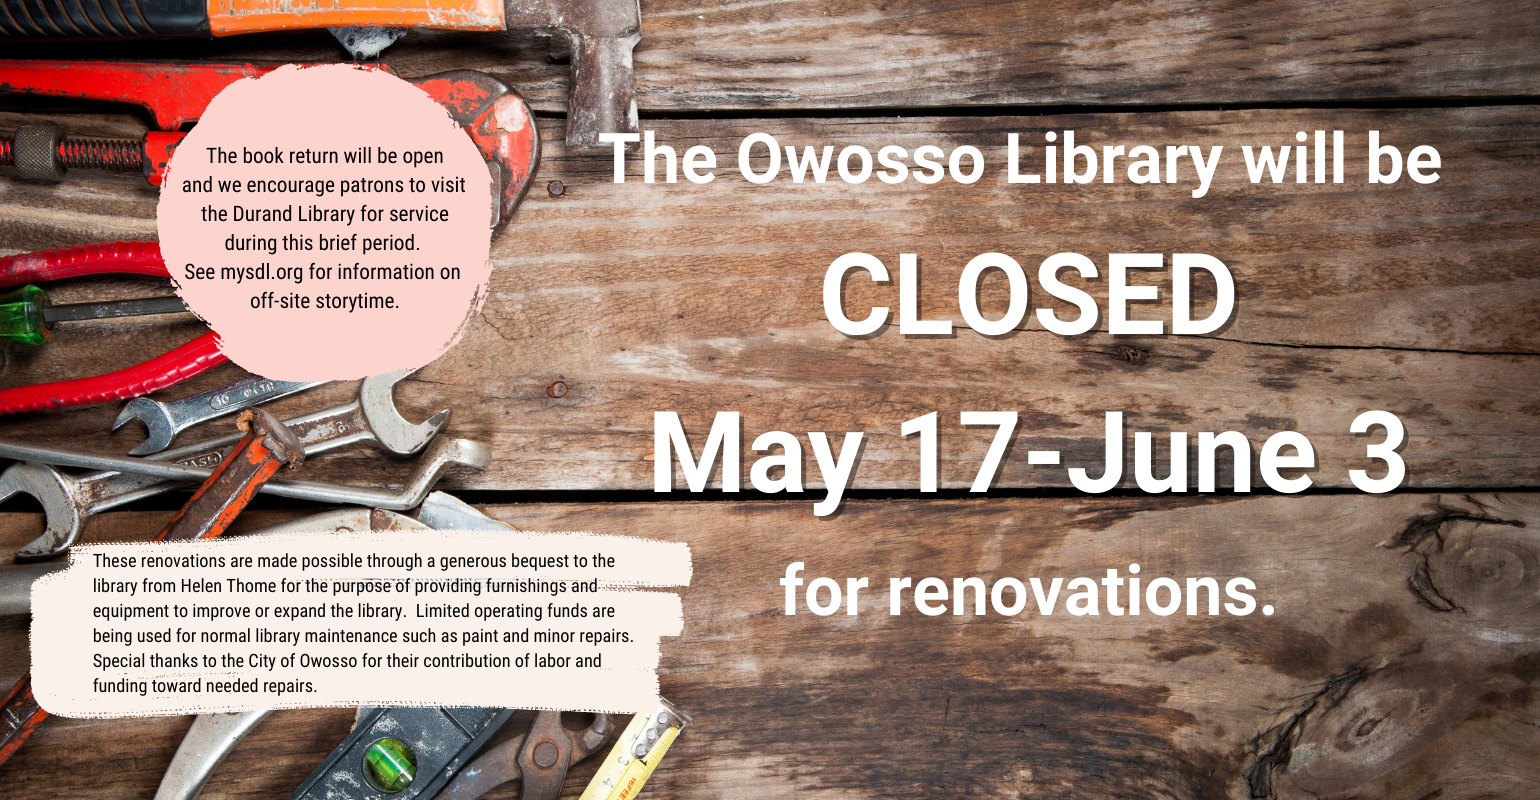 Owosso closed May 17-June 3 for renovations